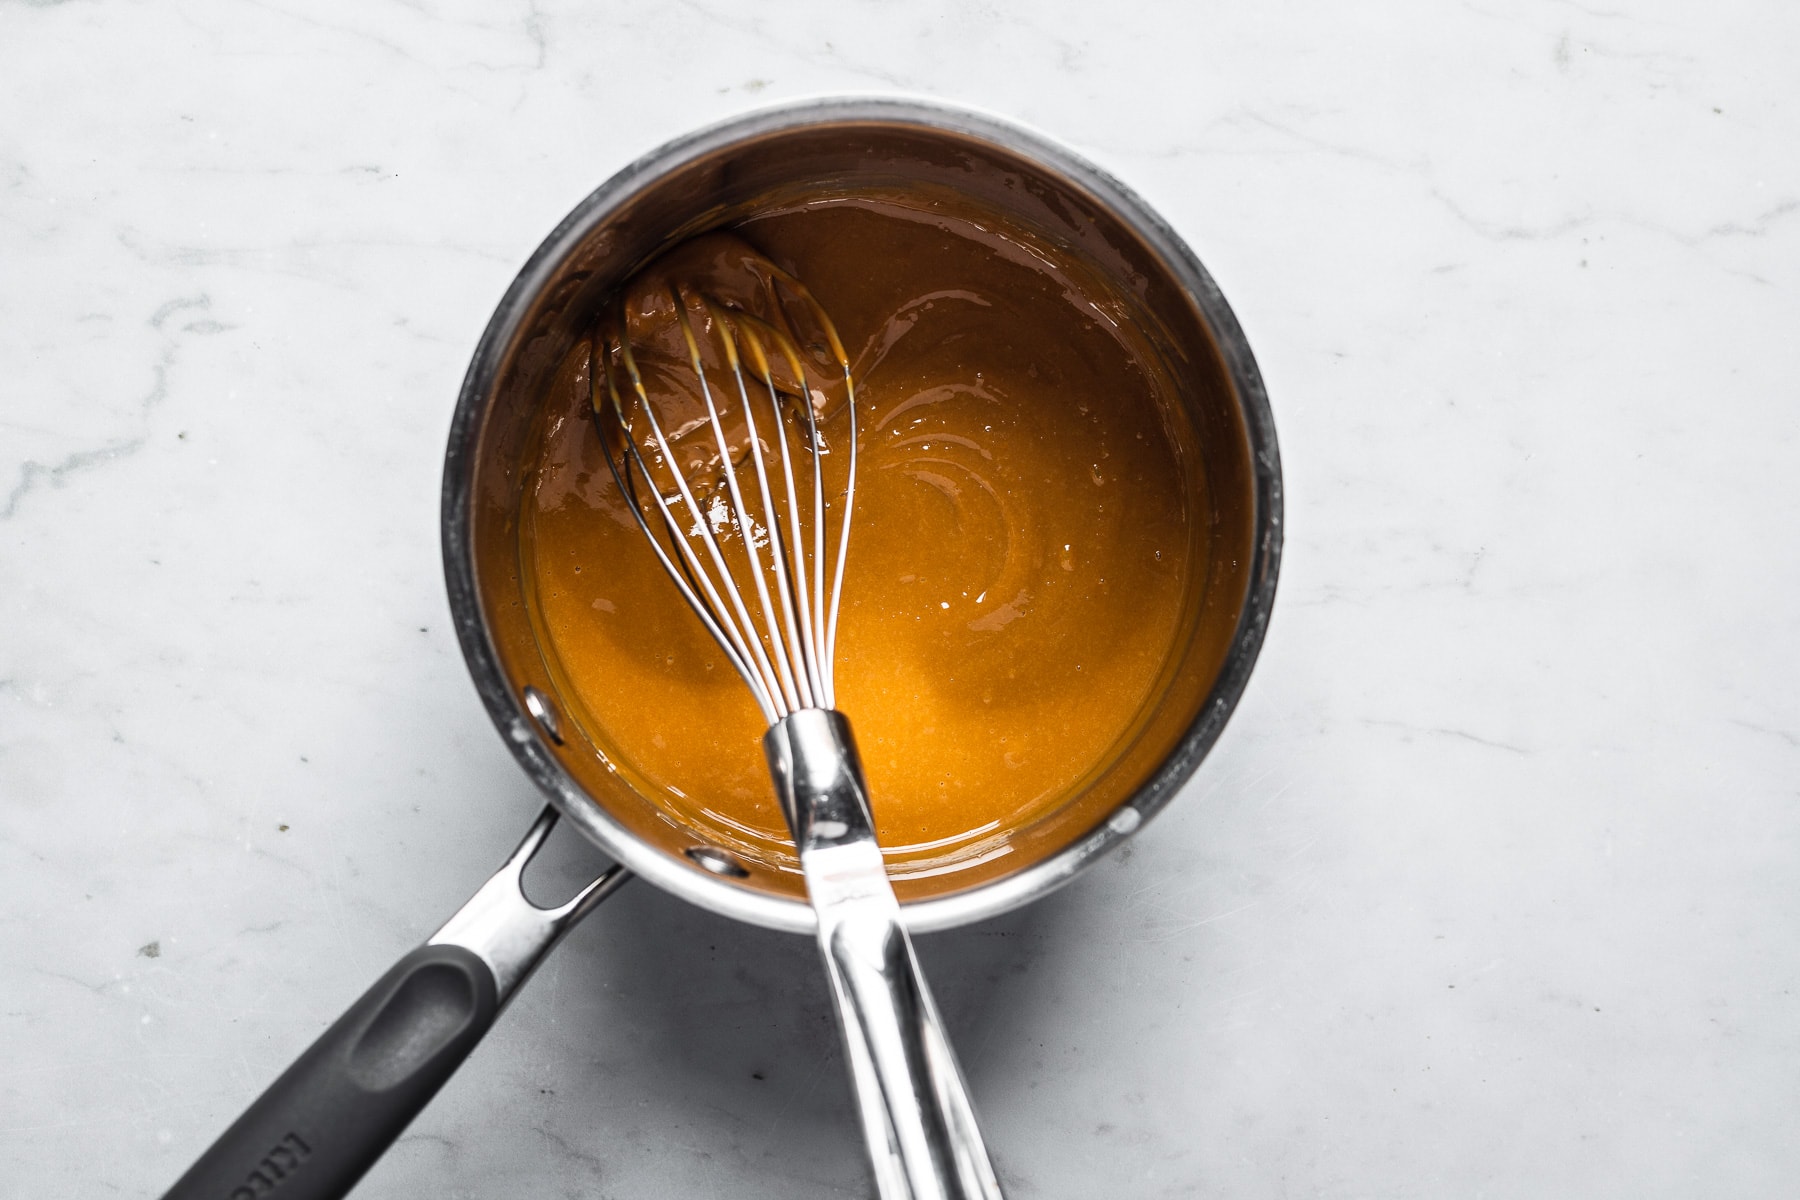 Process photo showing dulce de leche and eggs being mixed in a saucepot with a whisk.